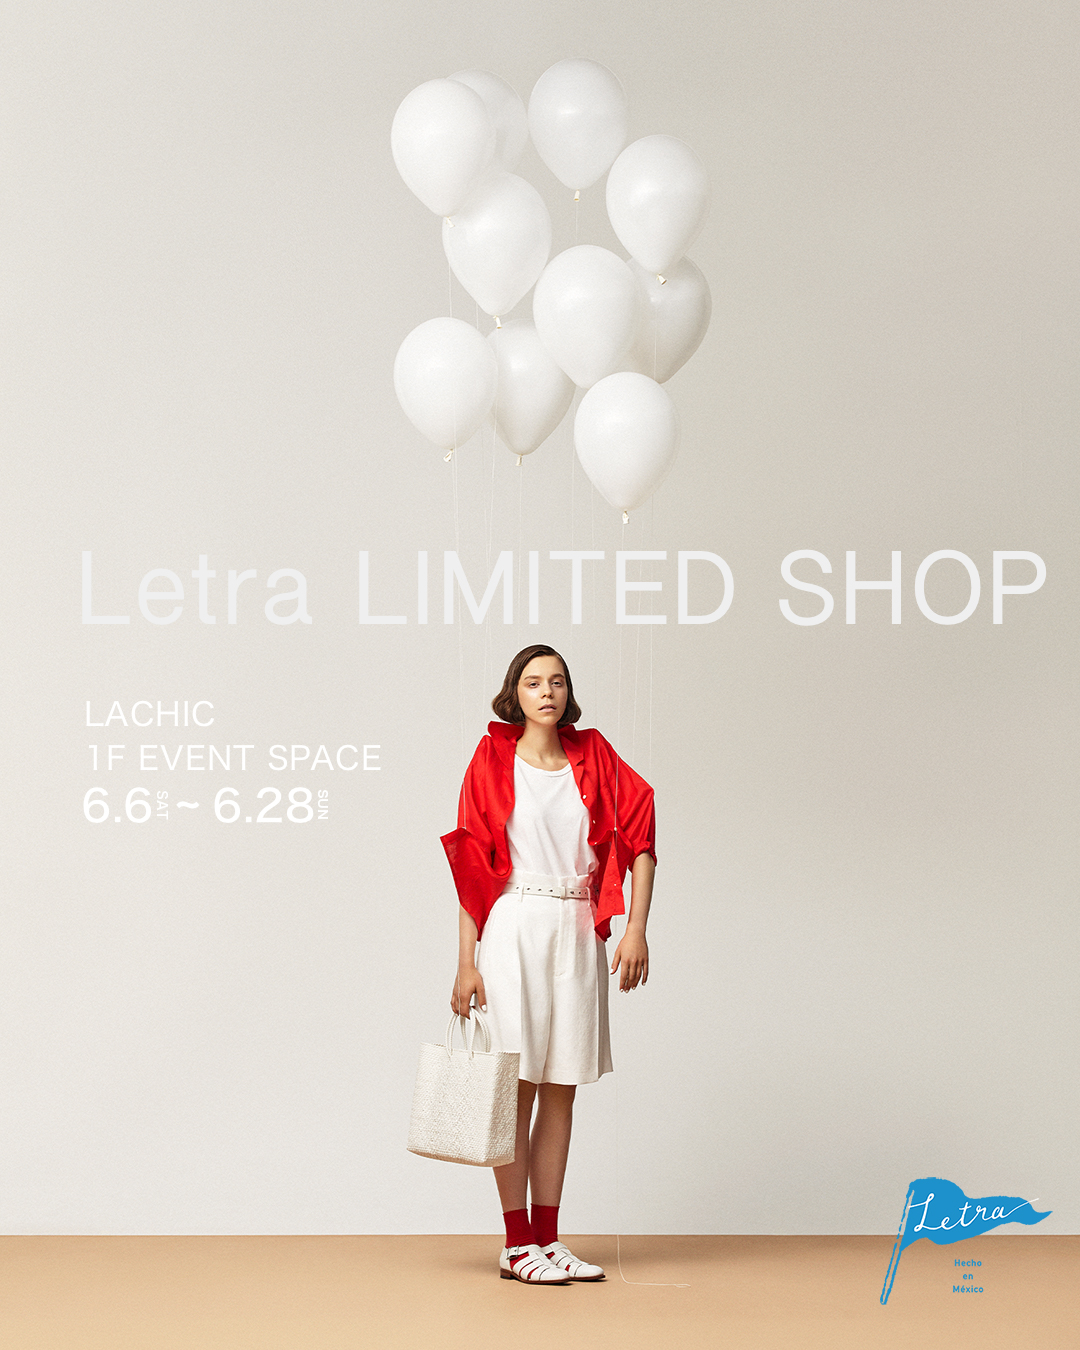 Letra Limited Shop 名古屋ラシック OPEN！